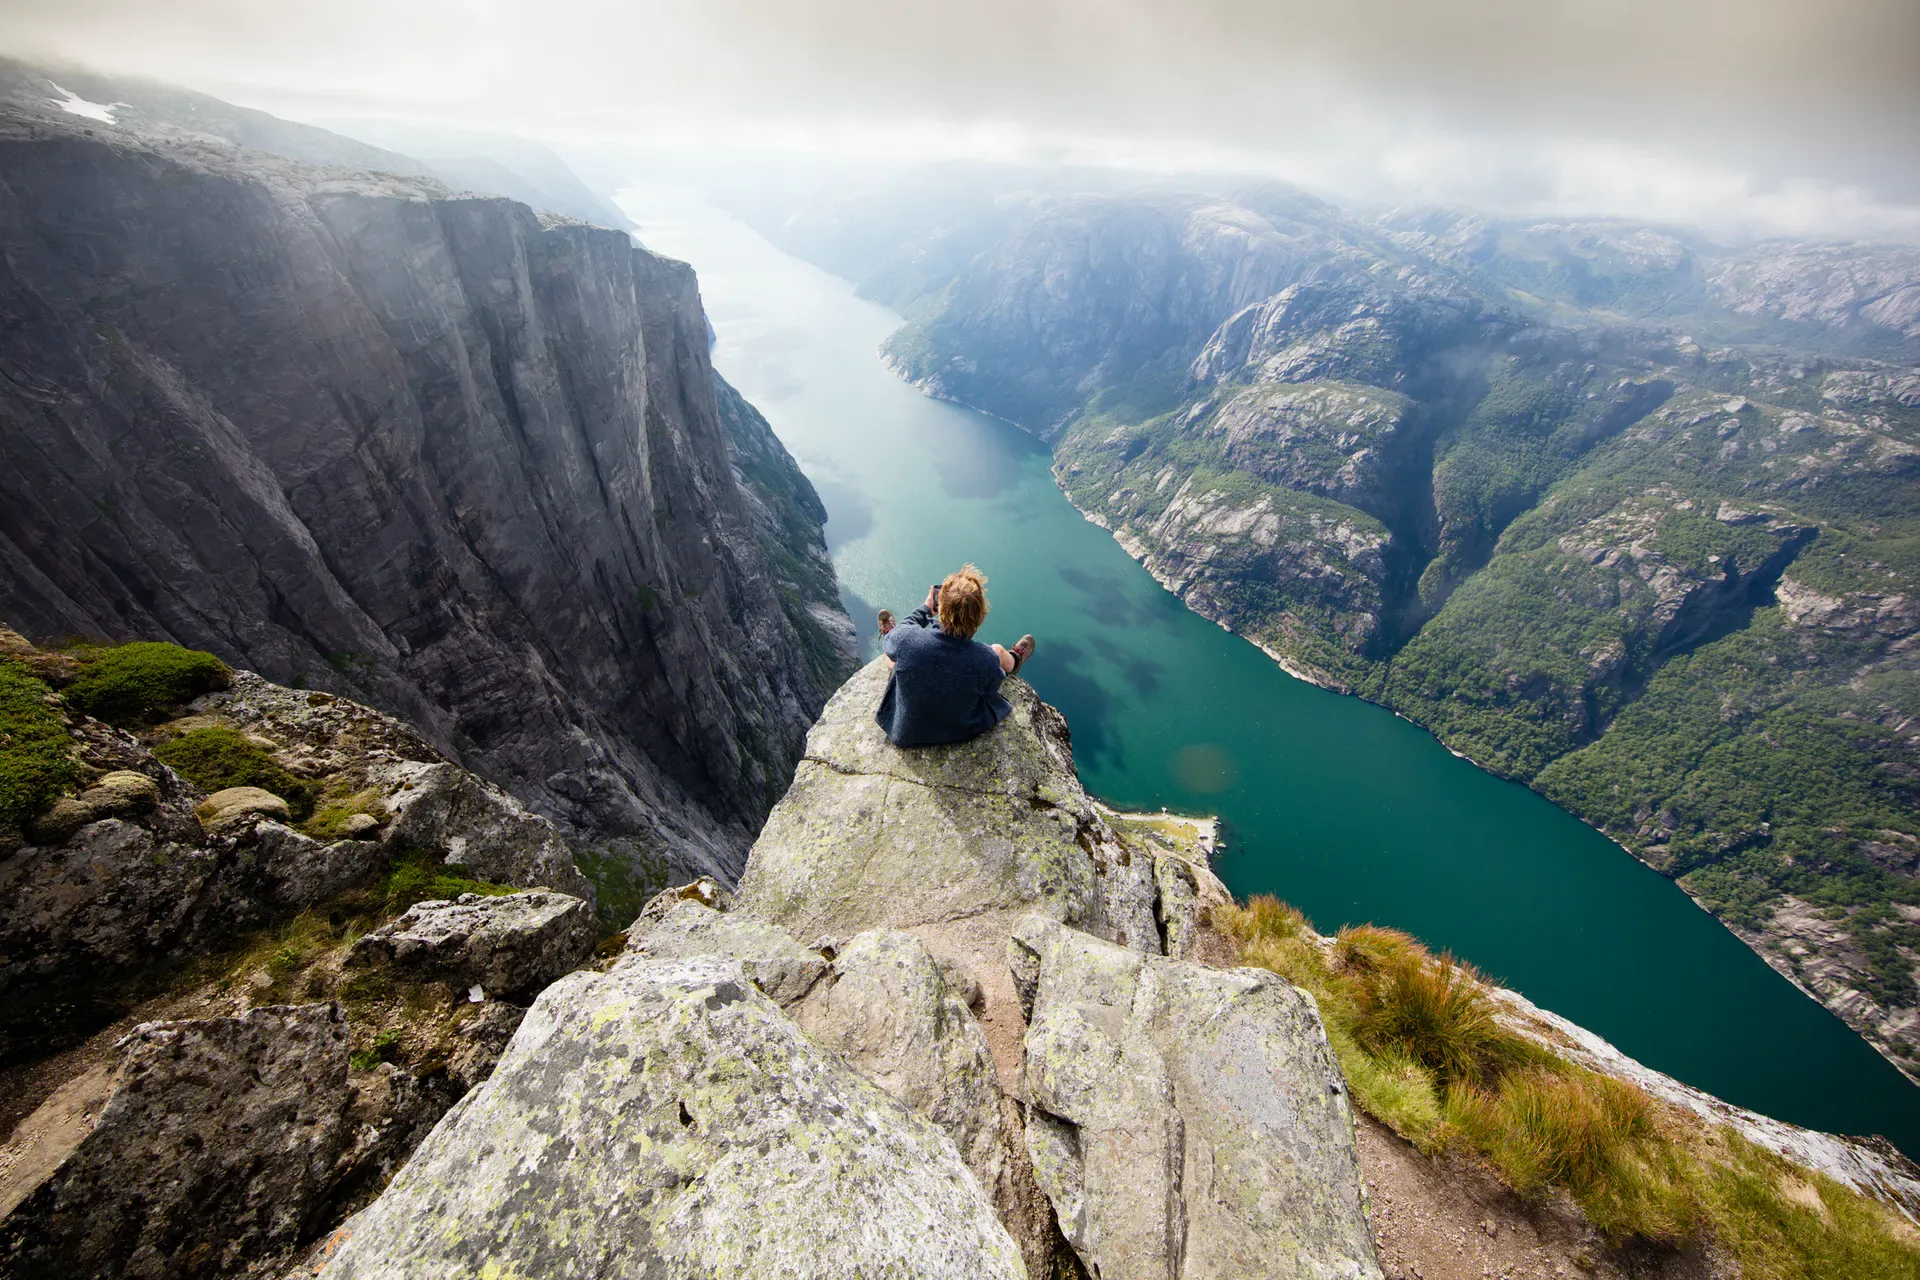 Person sat on rock up high overlooking amazing fjord views